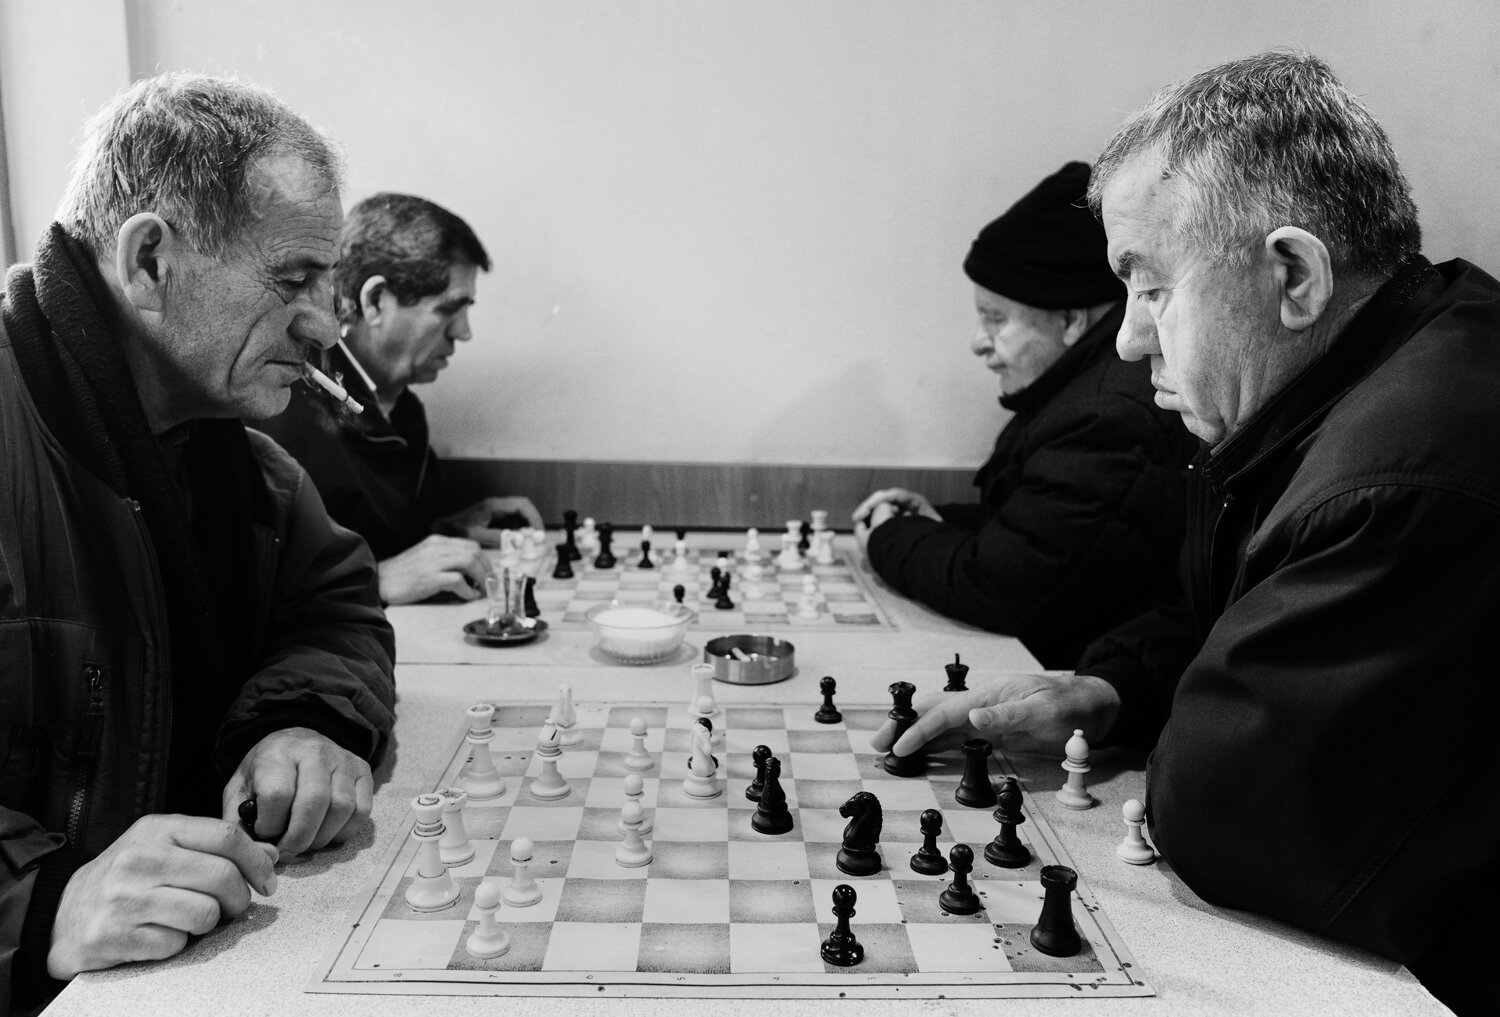  They are serious about chess—and smoking—here. When Adnan and I hung the photos, we had to take breaks from the smoke. We both went home feeling a bit sick. 2017. 